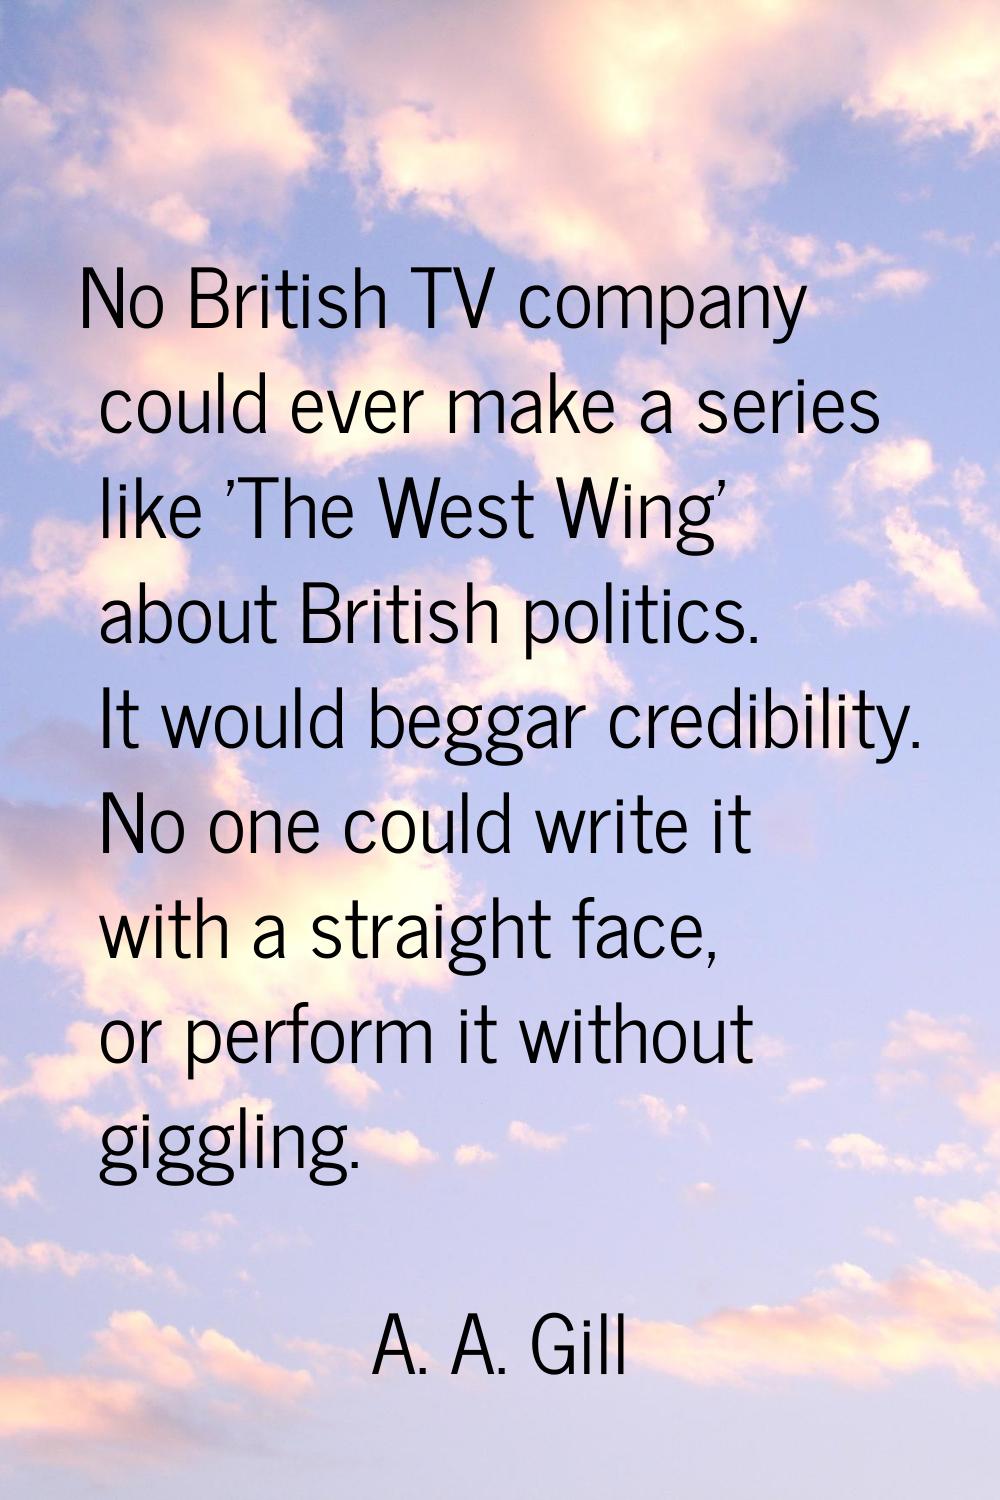 No British TV company could ever make a series like 'The West Wing' about British politics. It woul